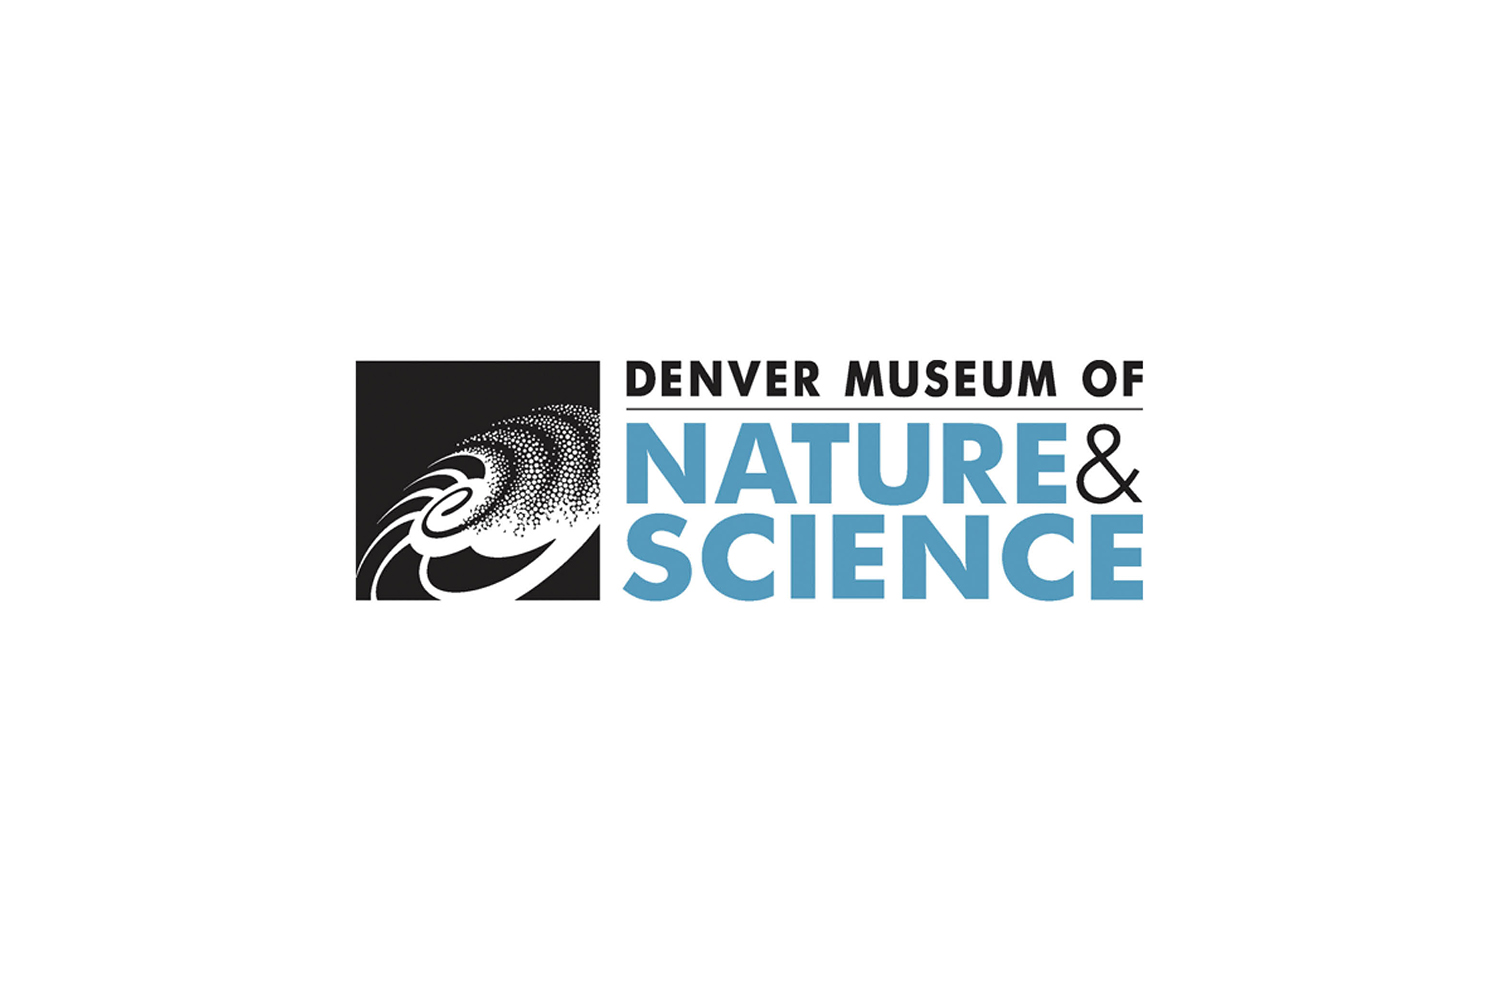 Boss_Display_Client_Denver_Museum_of_Nature_and_Science_Logo.jpg